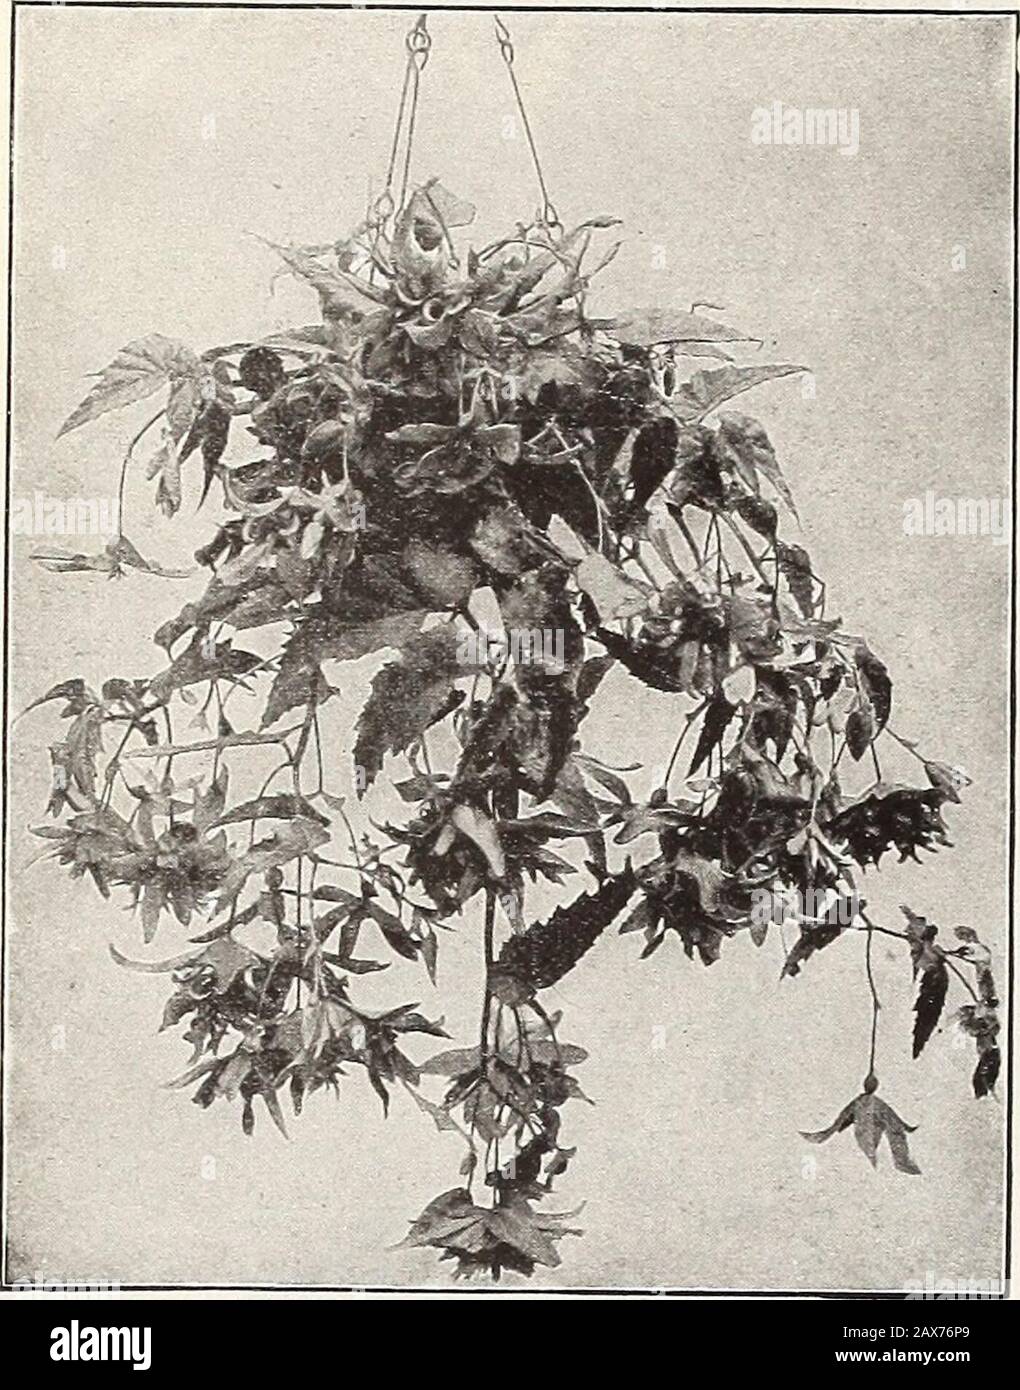 Currie's farm and garden annual : spring 1915 . AQUILEGIA CURRIES EXTRA CHOICE LONG-SPURRED HYBRIDS. Pkt.Asparagus Sprengeri (Emerald Feather)—One of theeasiest plants to grow in pots or hanging baskets,producing graceful fronds 4 feet long, flowerswhite, followed by red berries. Grows readily fromSeed. 15 Seeds 10 Bachelor Button—See Cornflower. ASPARAGUS PLUMOSUS NANUS. BALLOON VINE. Cardiospermum Halicaca- bum—A rapid growingannual climber. Suc-ceeds best in light soiland warm situations,flowers white. Seed ves-sels look like miniatureballoons. H. A. 5 feet. BARTONIA. Aurea—Showy plants wit Stock Photo